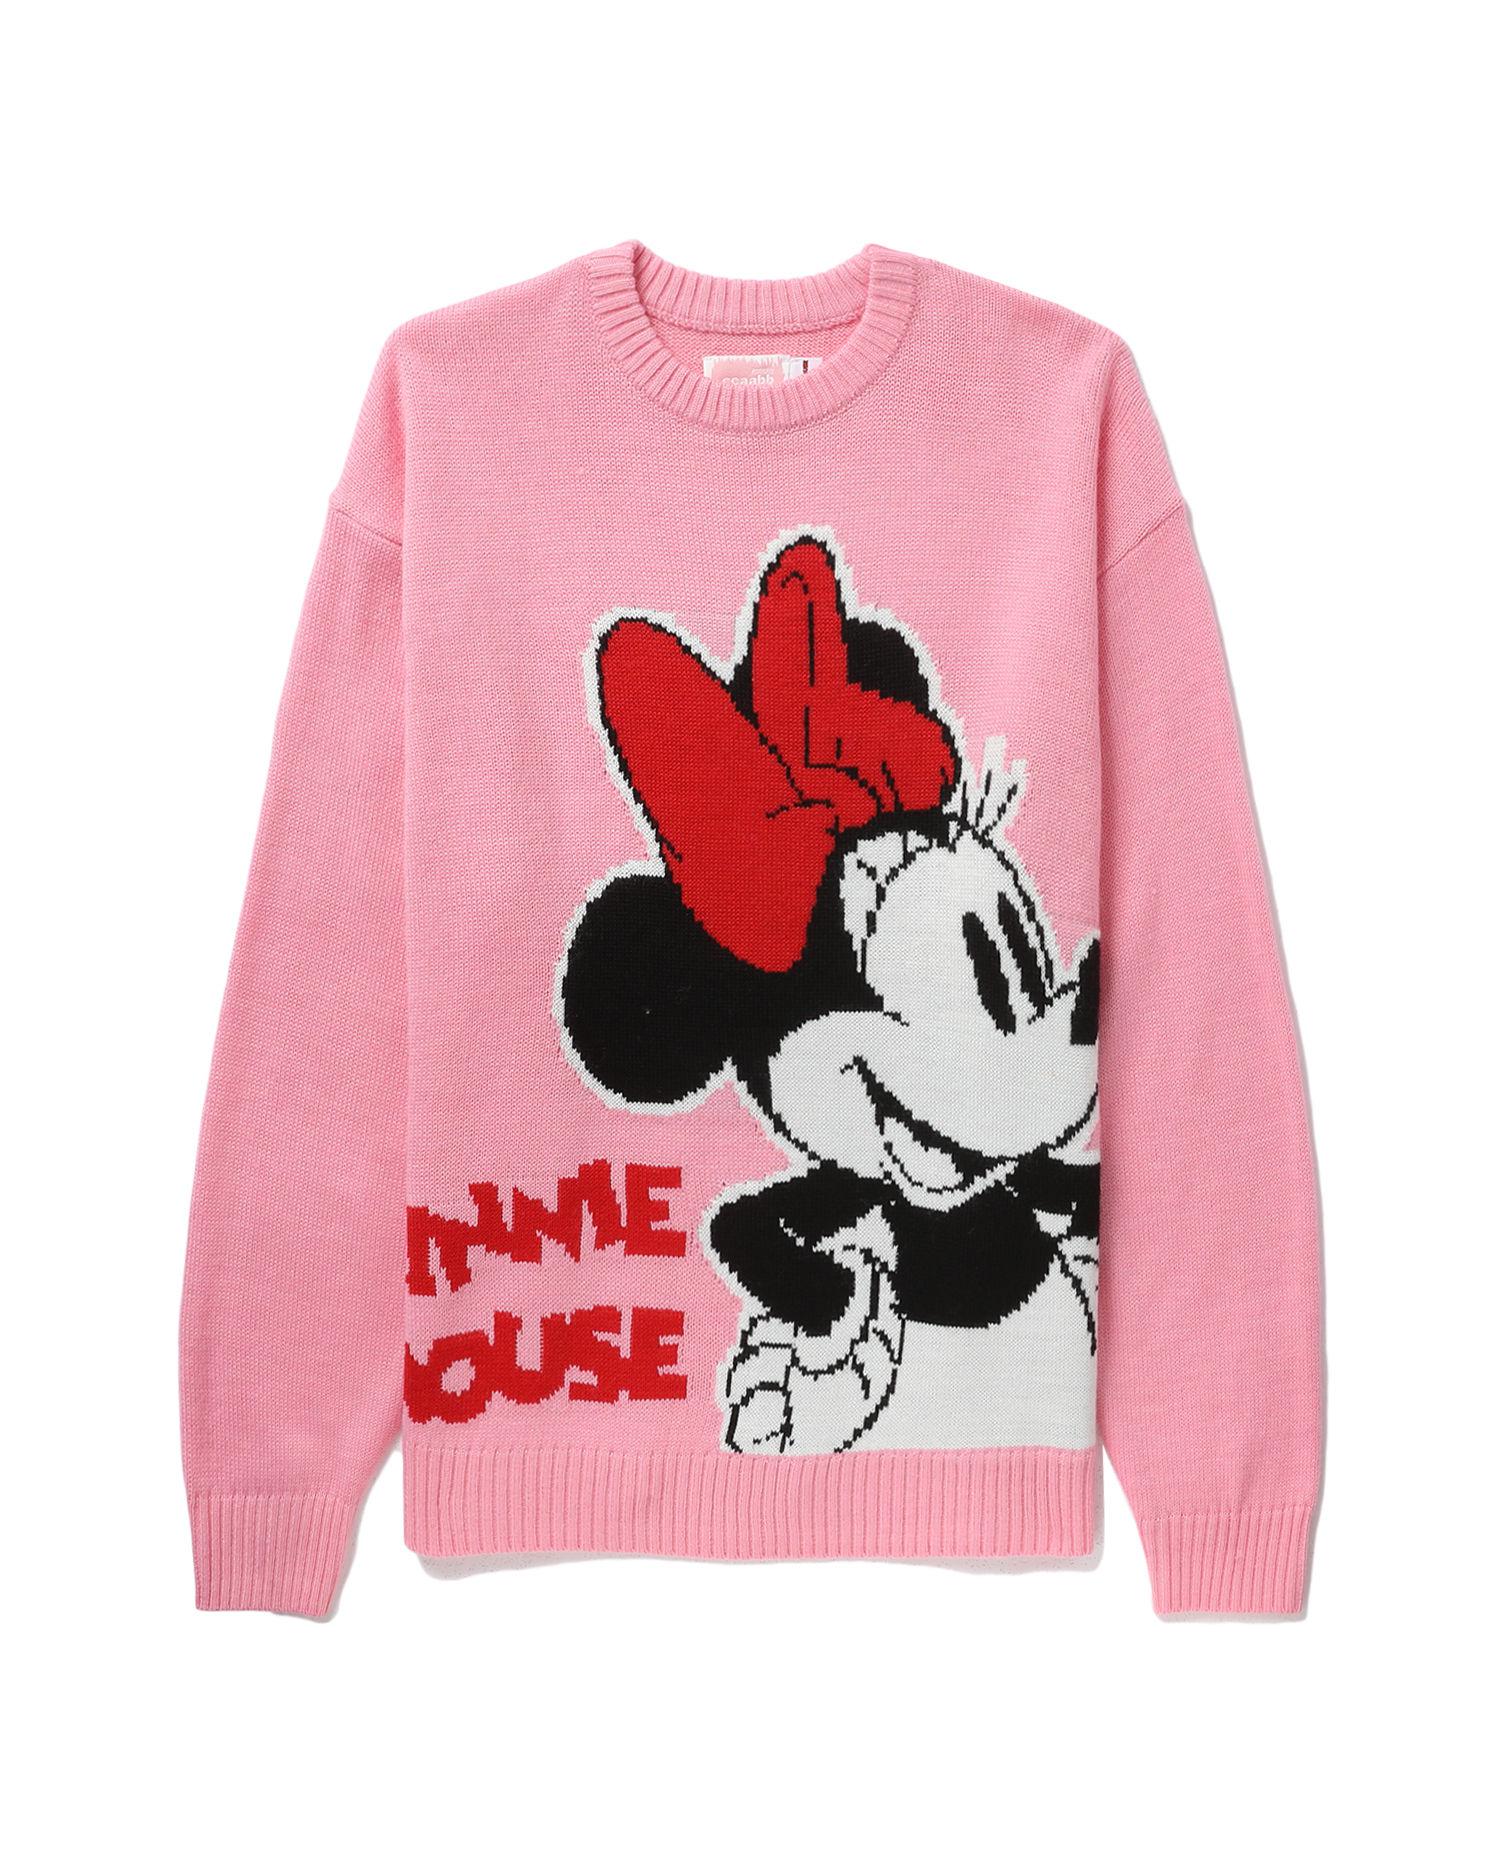 X Disney Minnie Mouse relaxed sweater by CCAABB